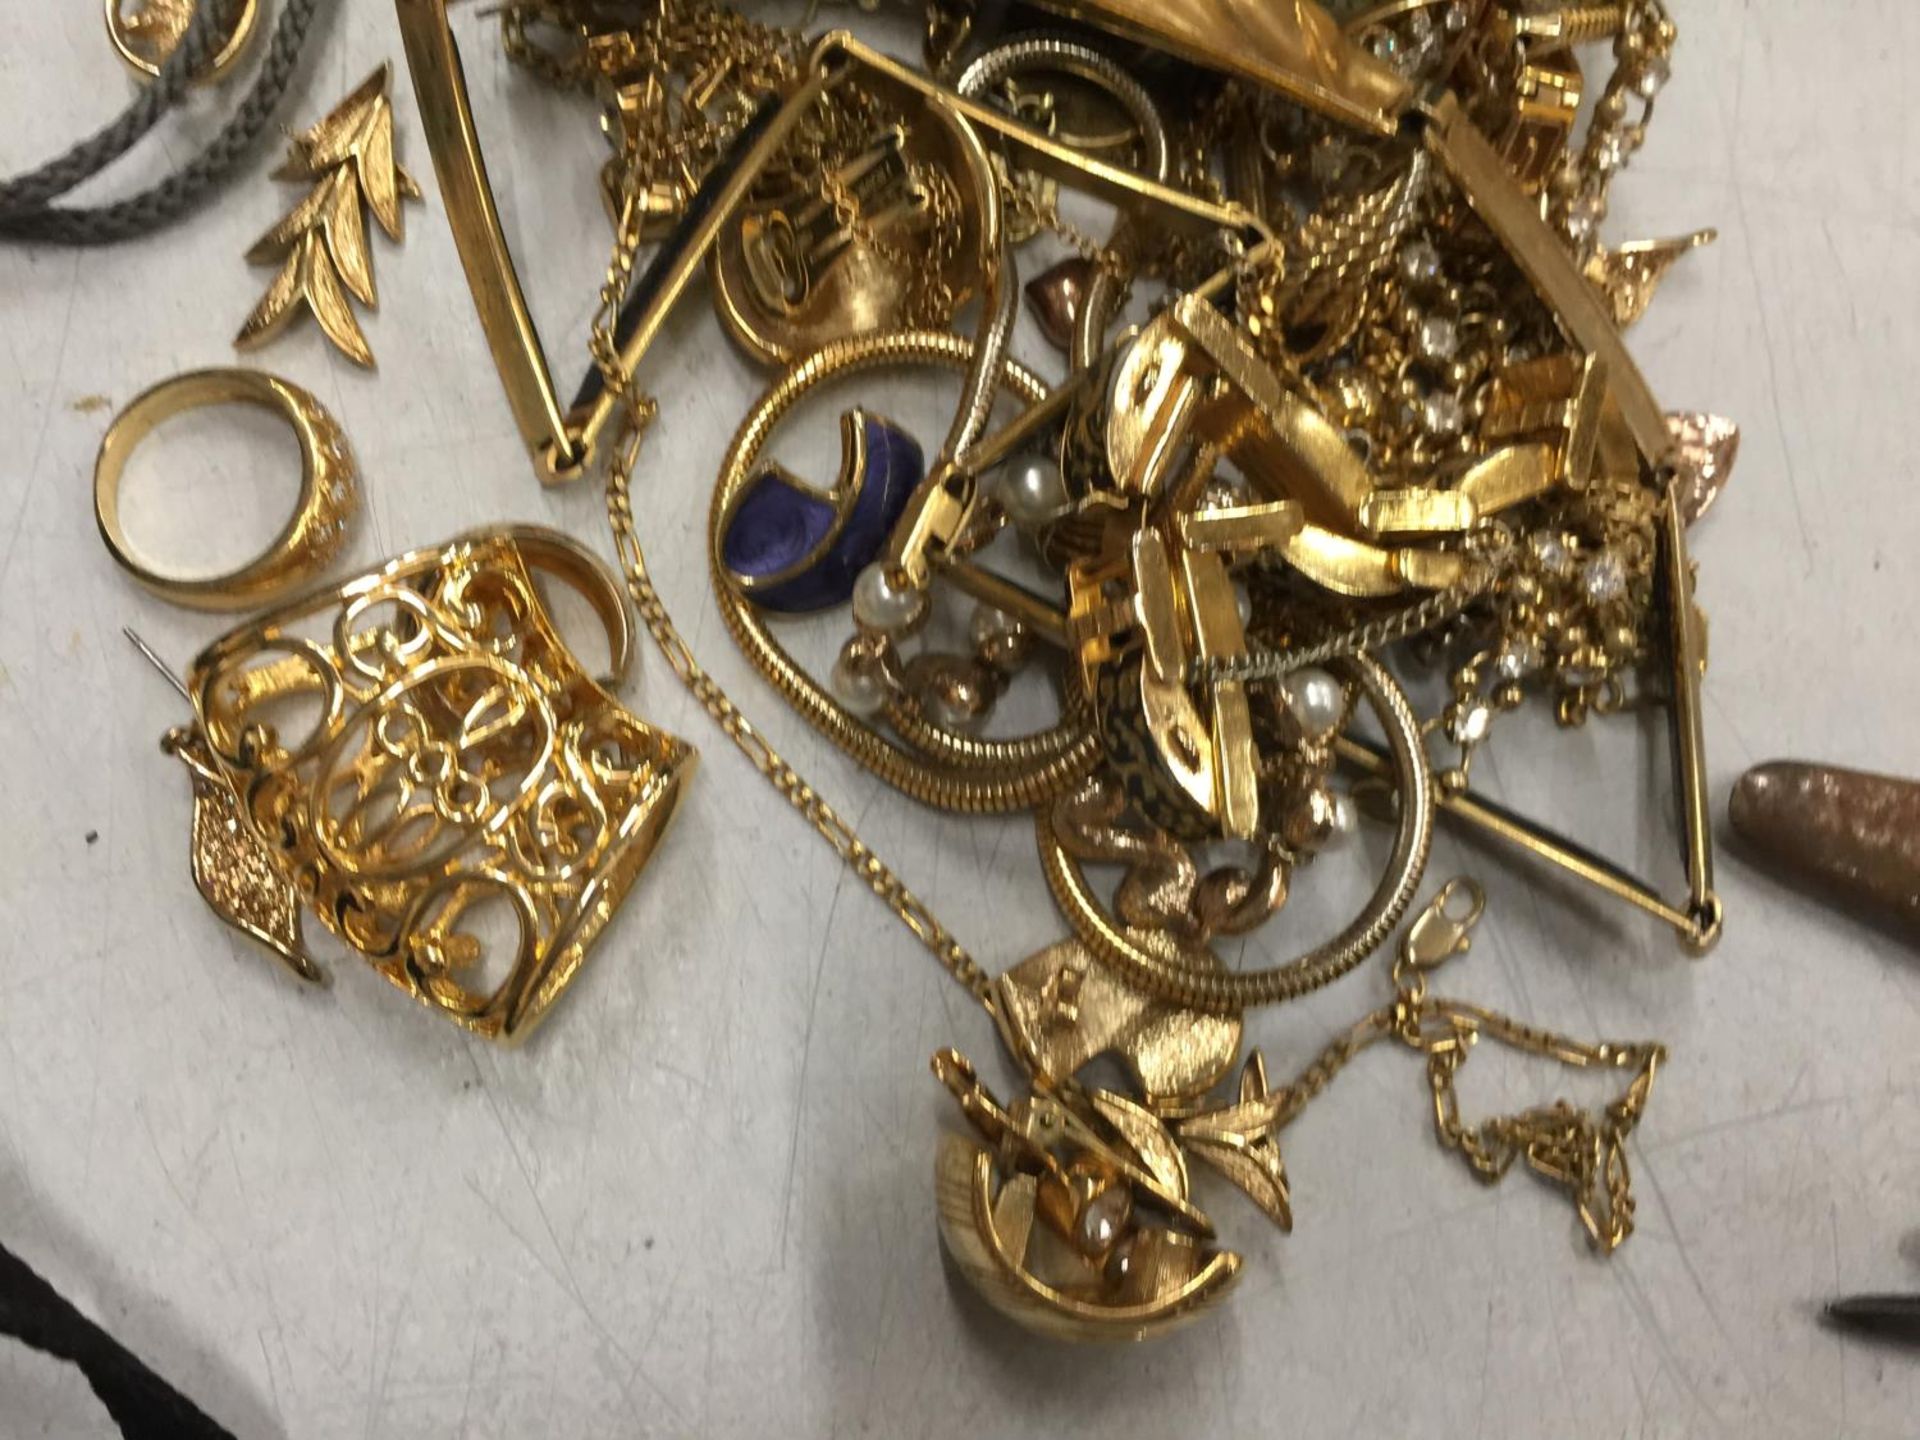 A QUANTITY OF YELLOW METAL COSTUME JEWELLERY TO INCLUDE CHAINS, NECKLACES, RINGS, EARRINGS, ETC - Image 3 of 6